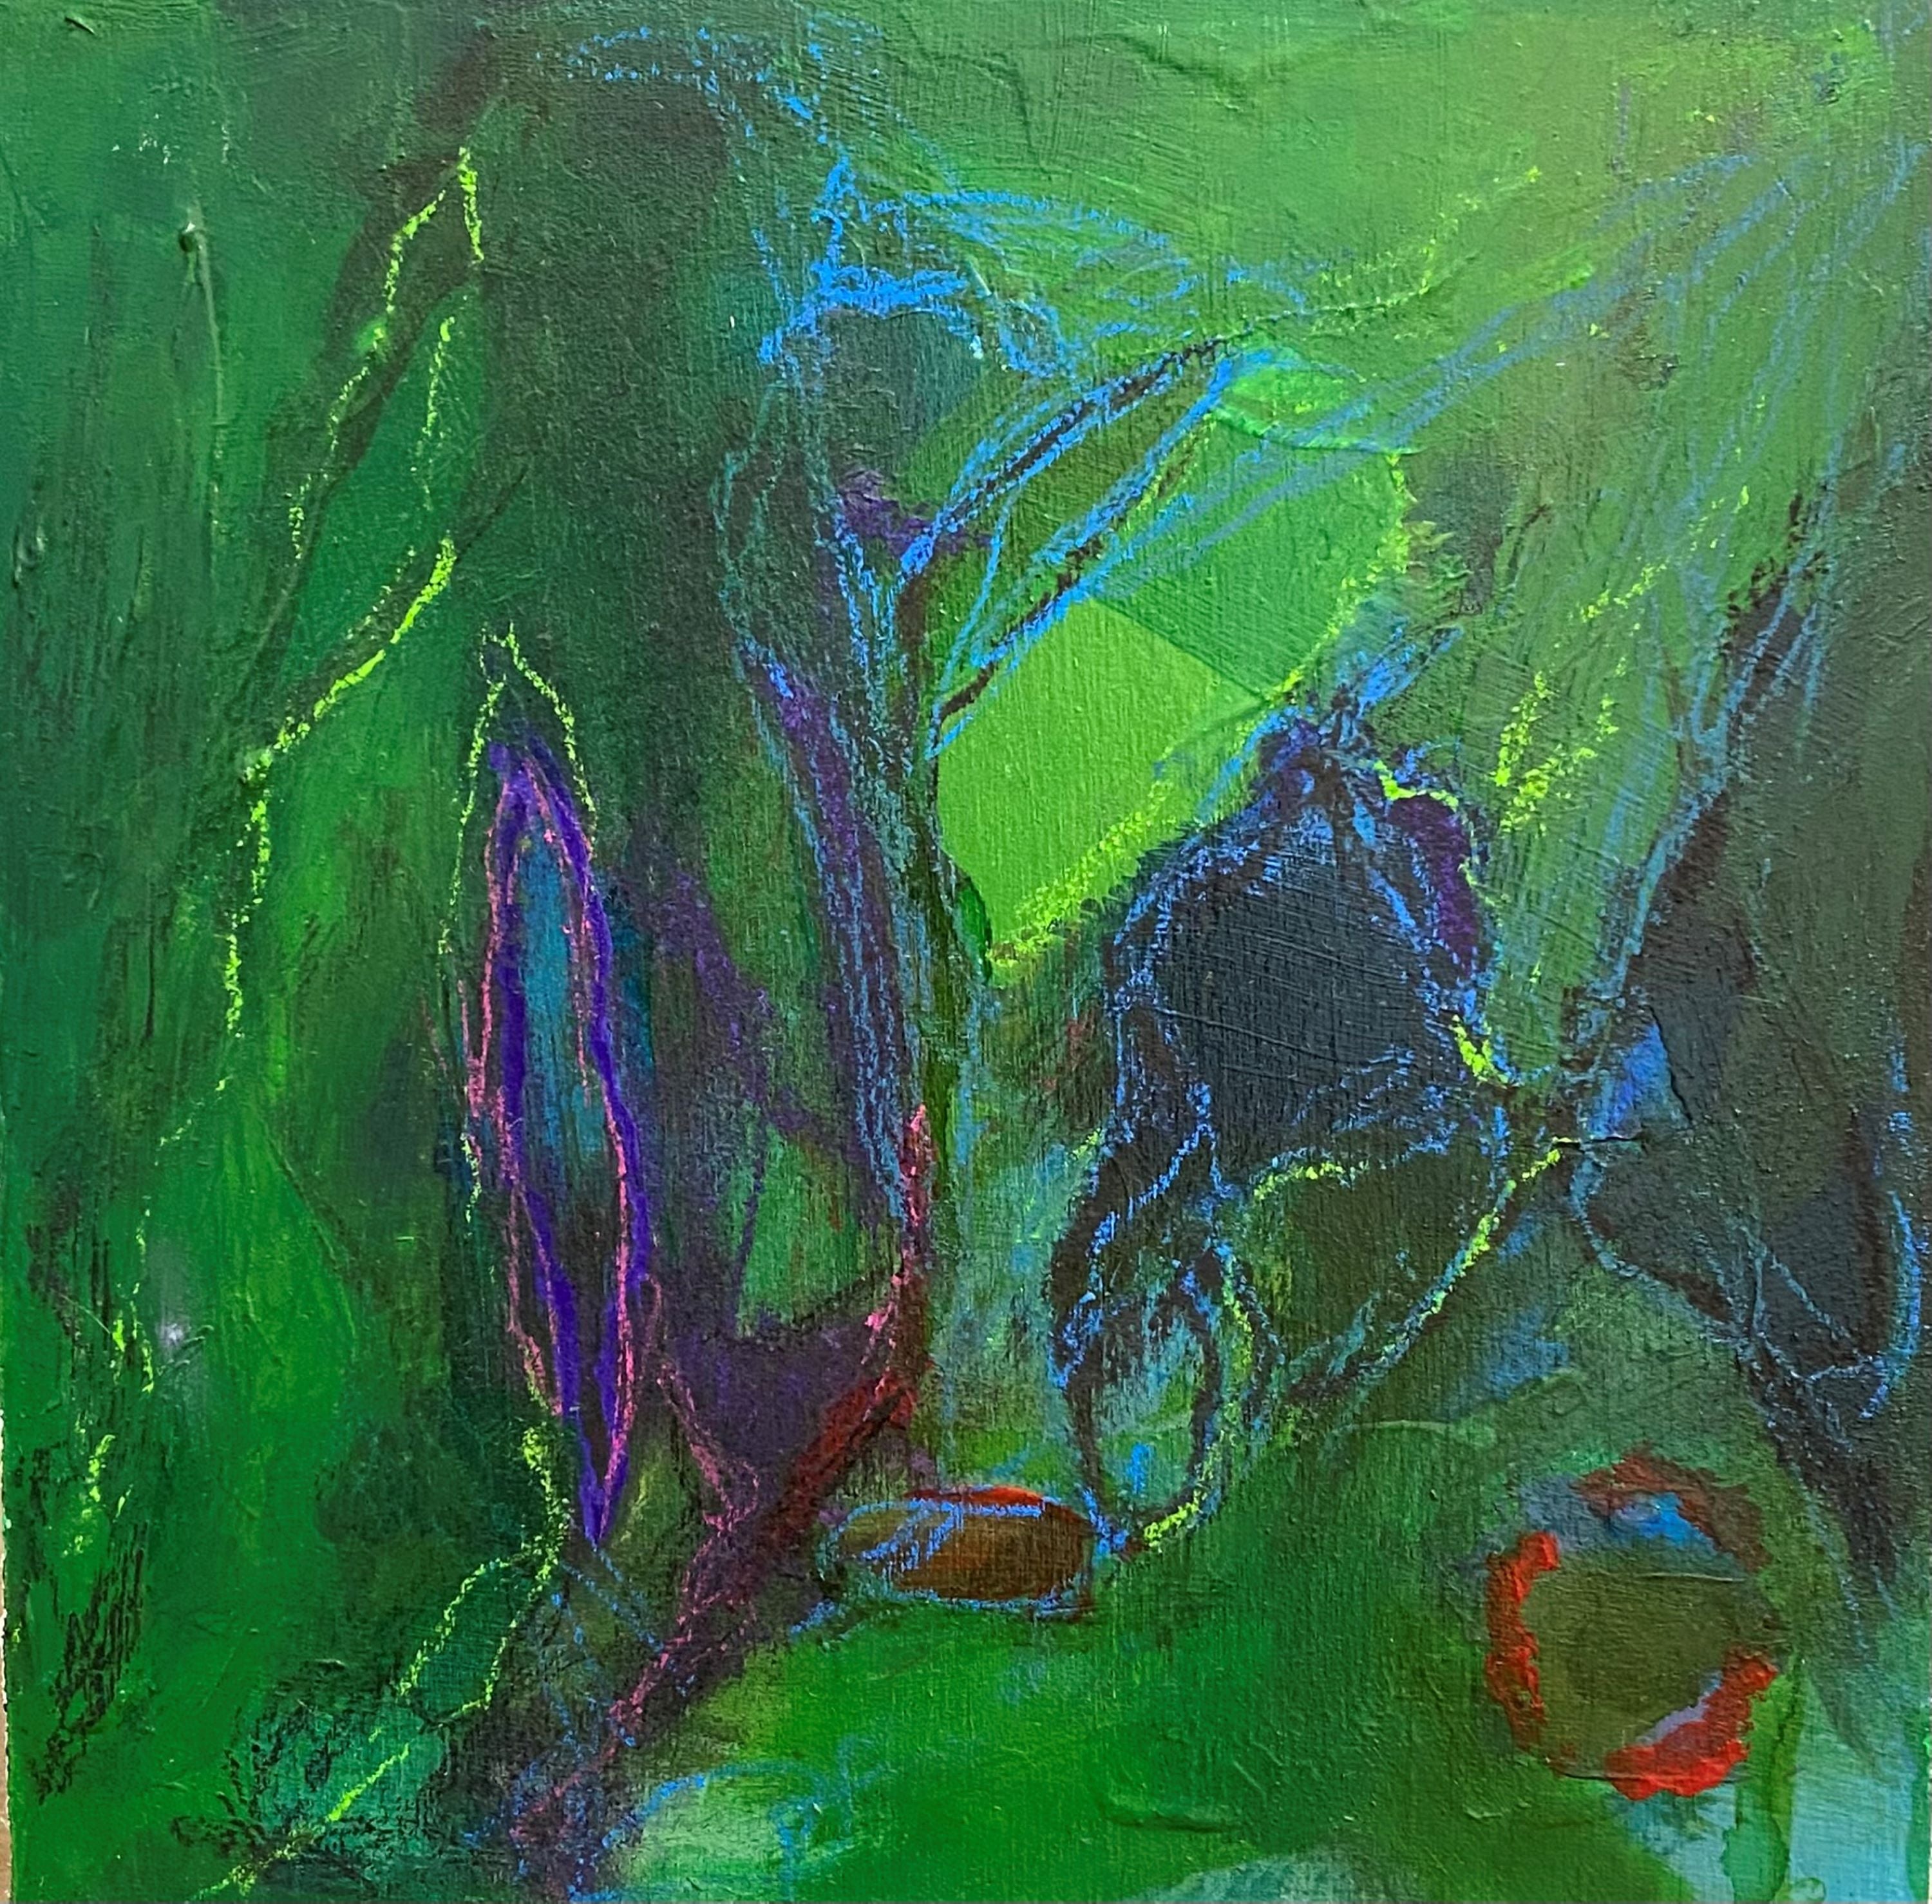 Staying Present, Original Contemporary Green Abstract Square Mixed Media Painting
8" x 8" x 2" (HxWxD) Acrylic, Ink, Soft Pastels, Oil Pastels, and Charcoal on Wood Panel

This small format work is one of four square abstract paintings on panel